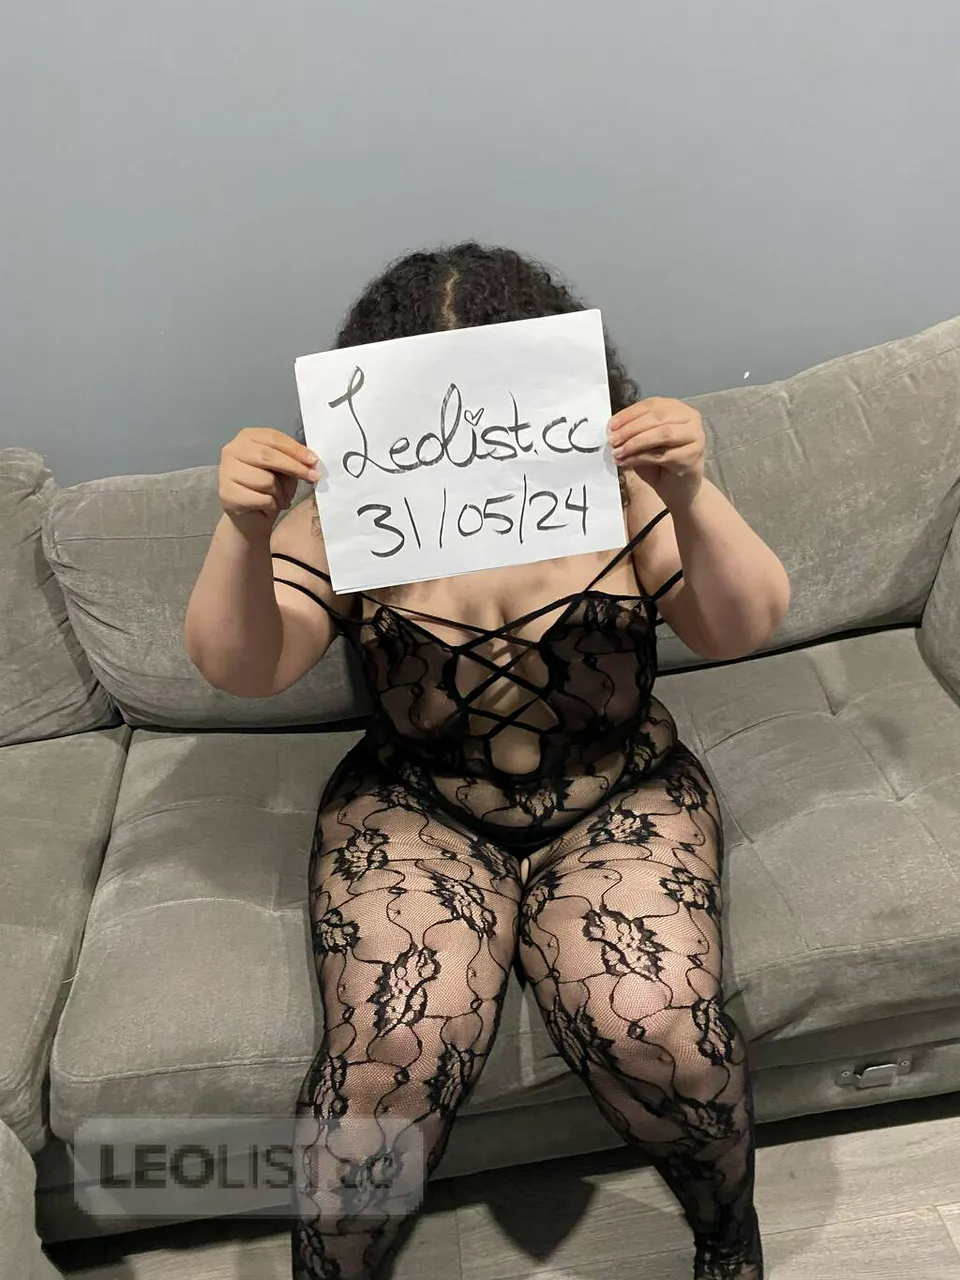 Escorts Vancouver, British Columbia CURVES THAT LEAVE YOU WANTING MORE ♡BURNABY ♡𝒟IRTY LINA